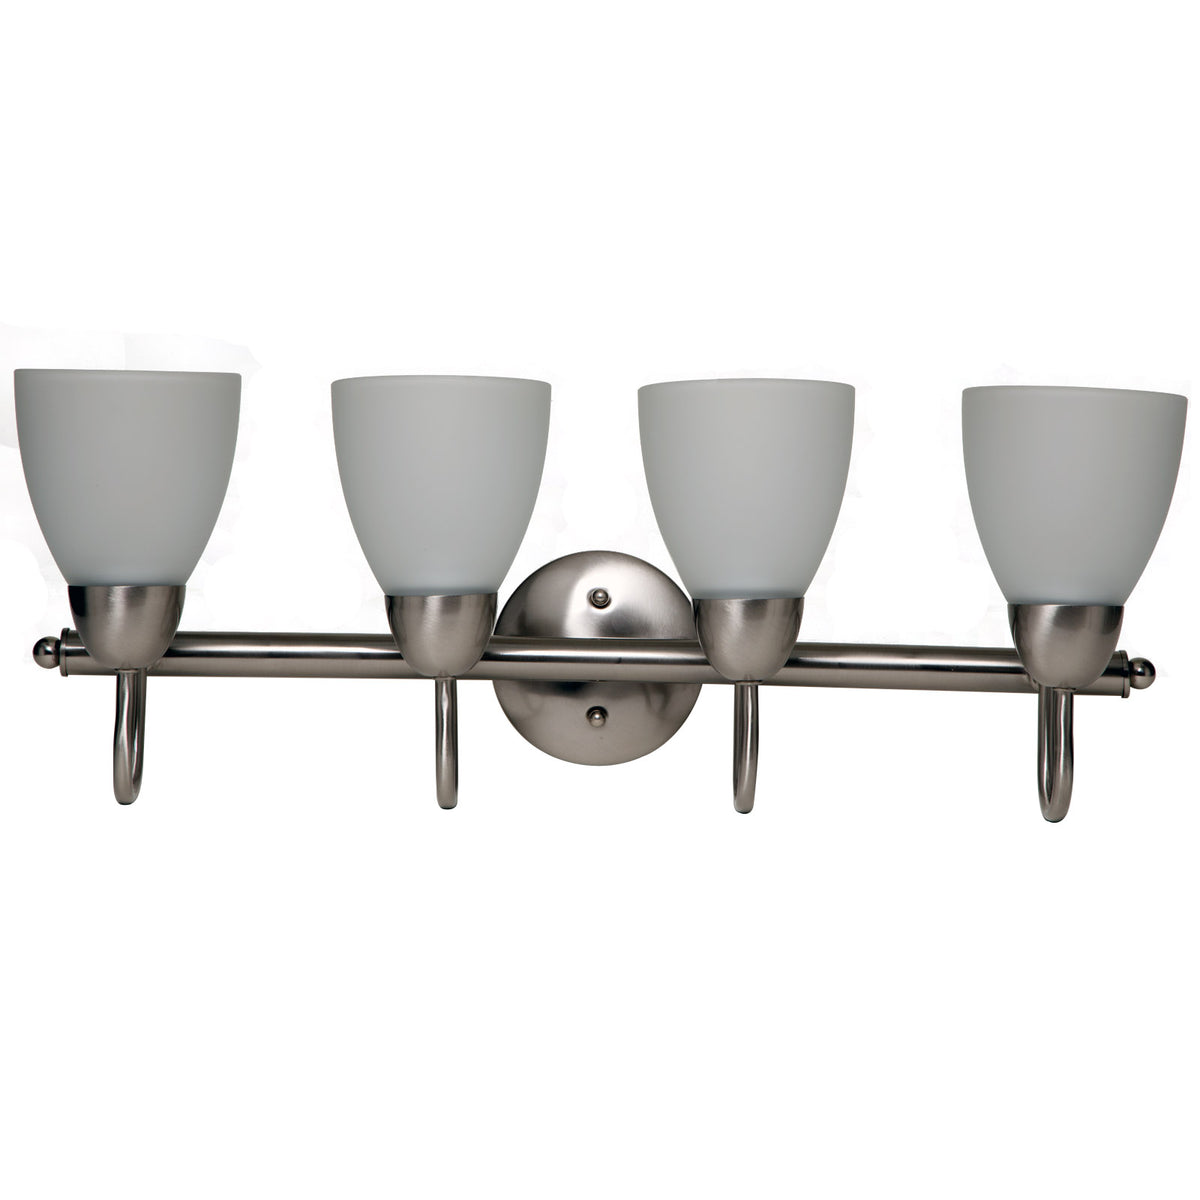 buy bathroom light fixtures at cheap rate in bulk. wholesale & retail lighting equipments store. home décor ideas, maintenance, repair replacement parts